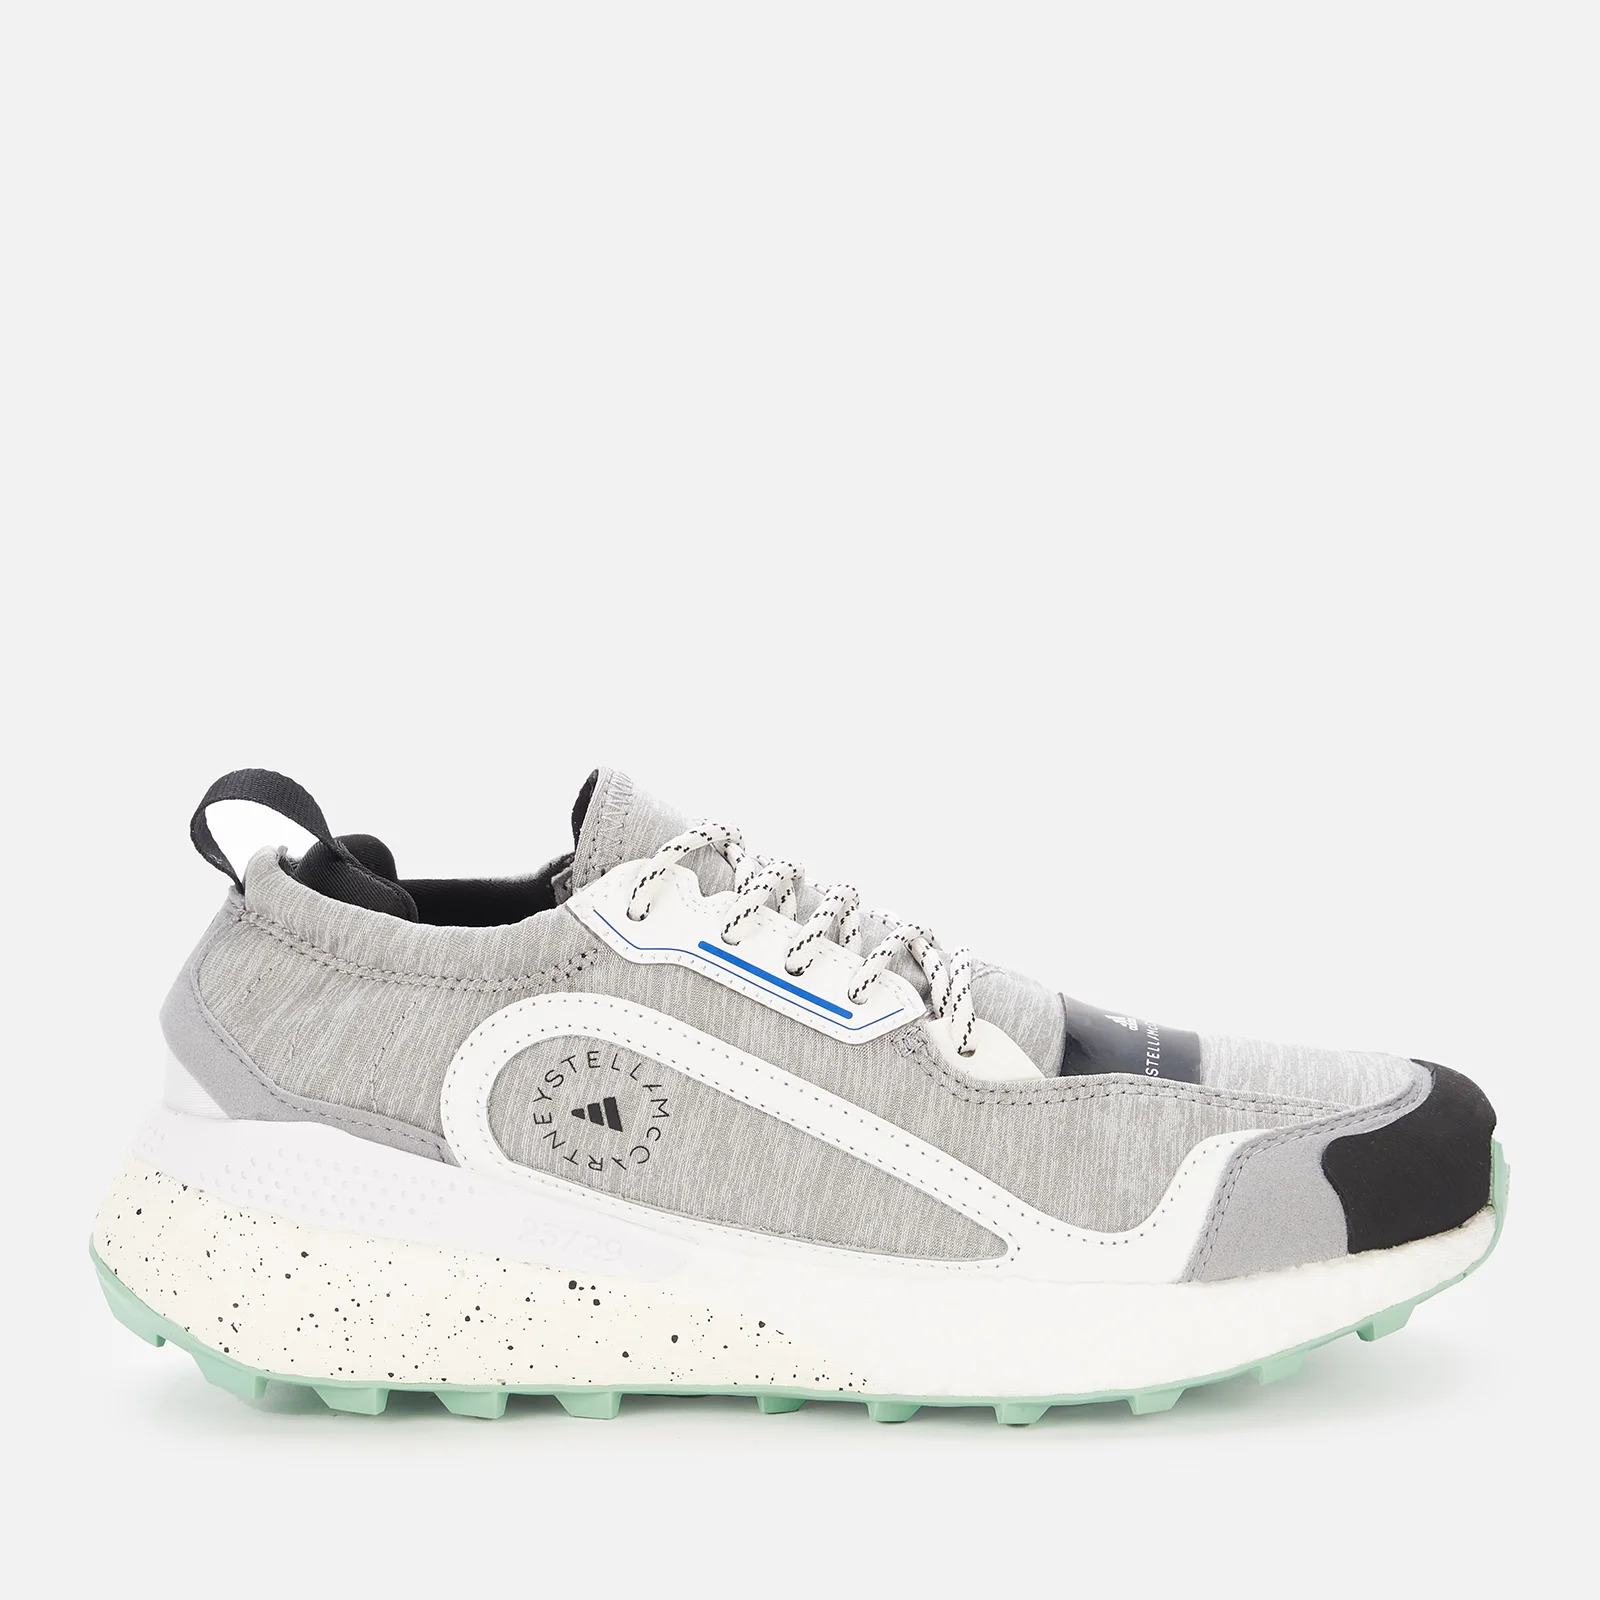 adidas by Stella McCartney Women's Outdoorboost 2.0 Heather Trainers - Grey/White Image 1